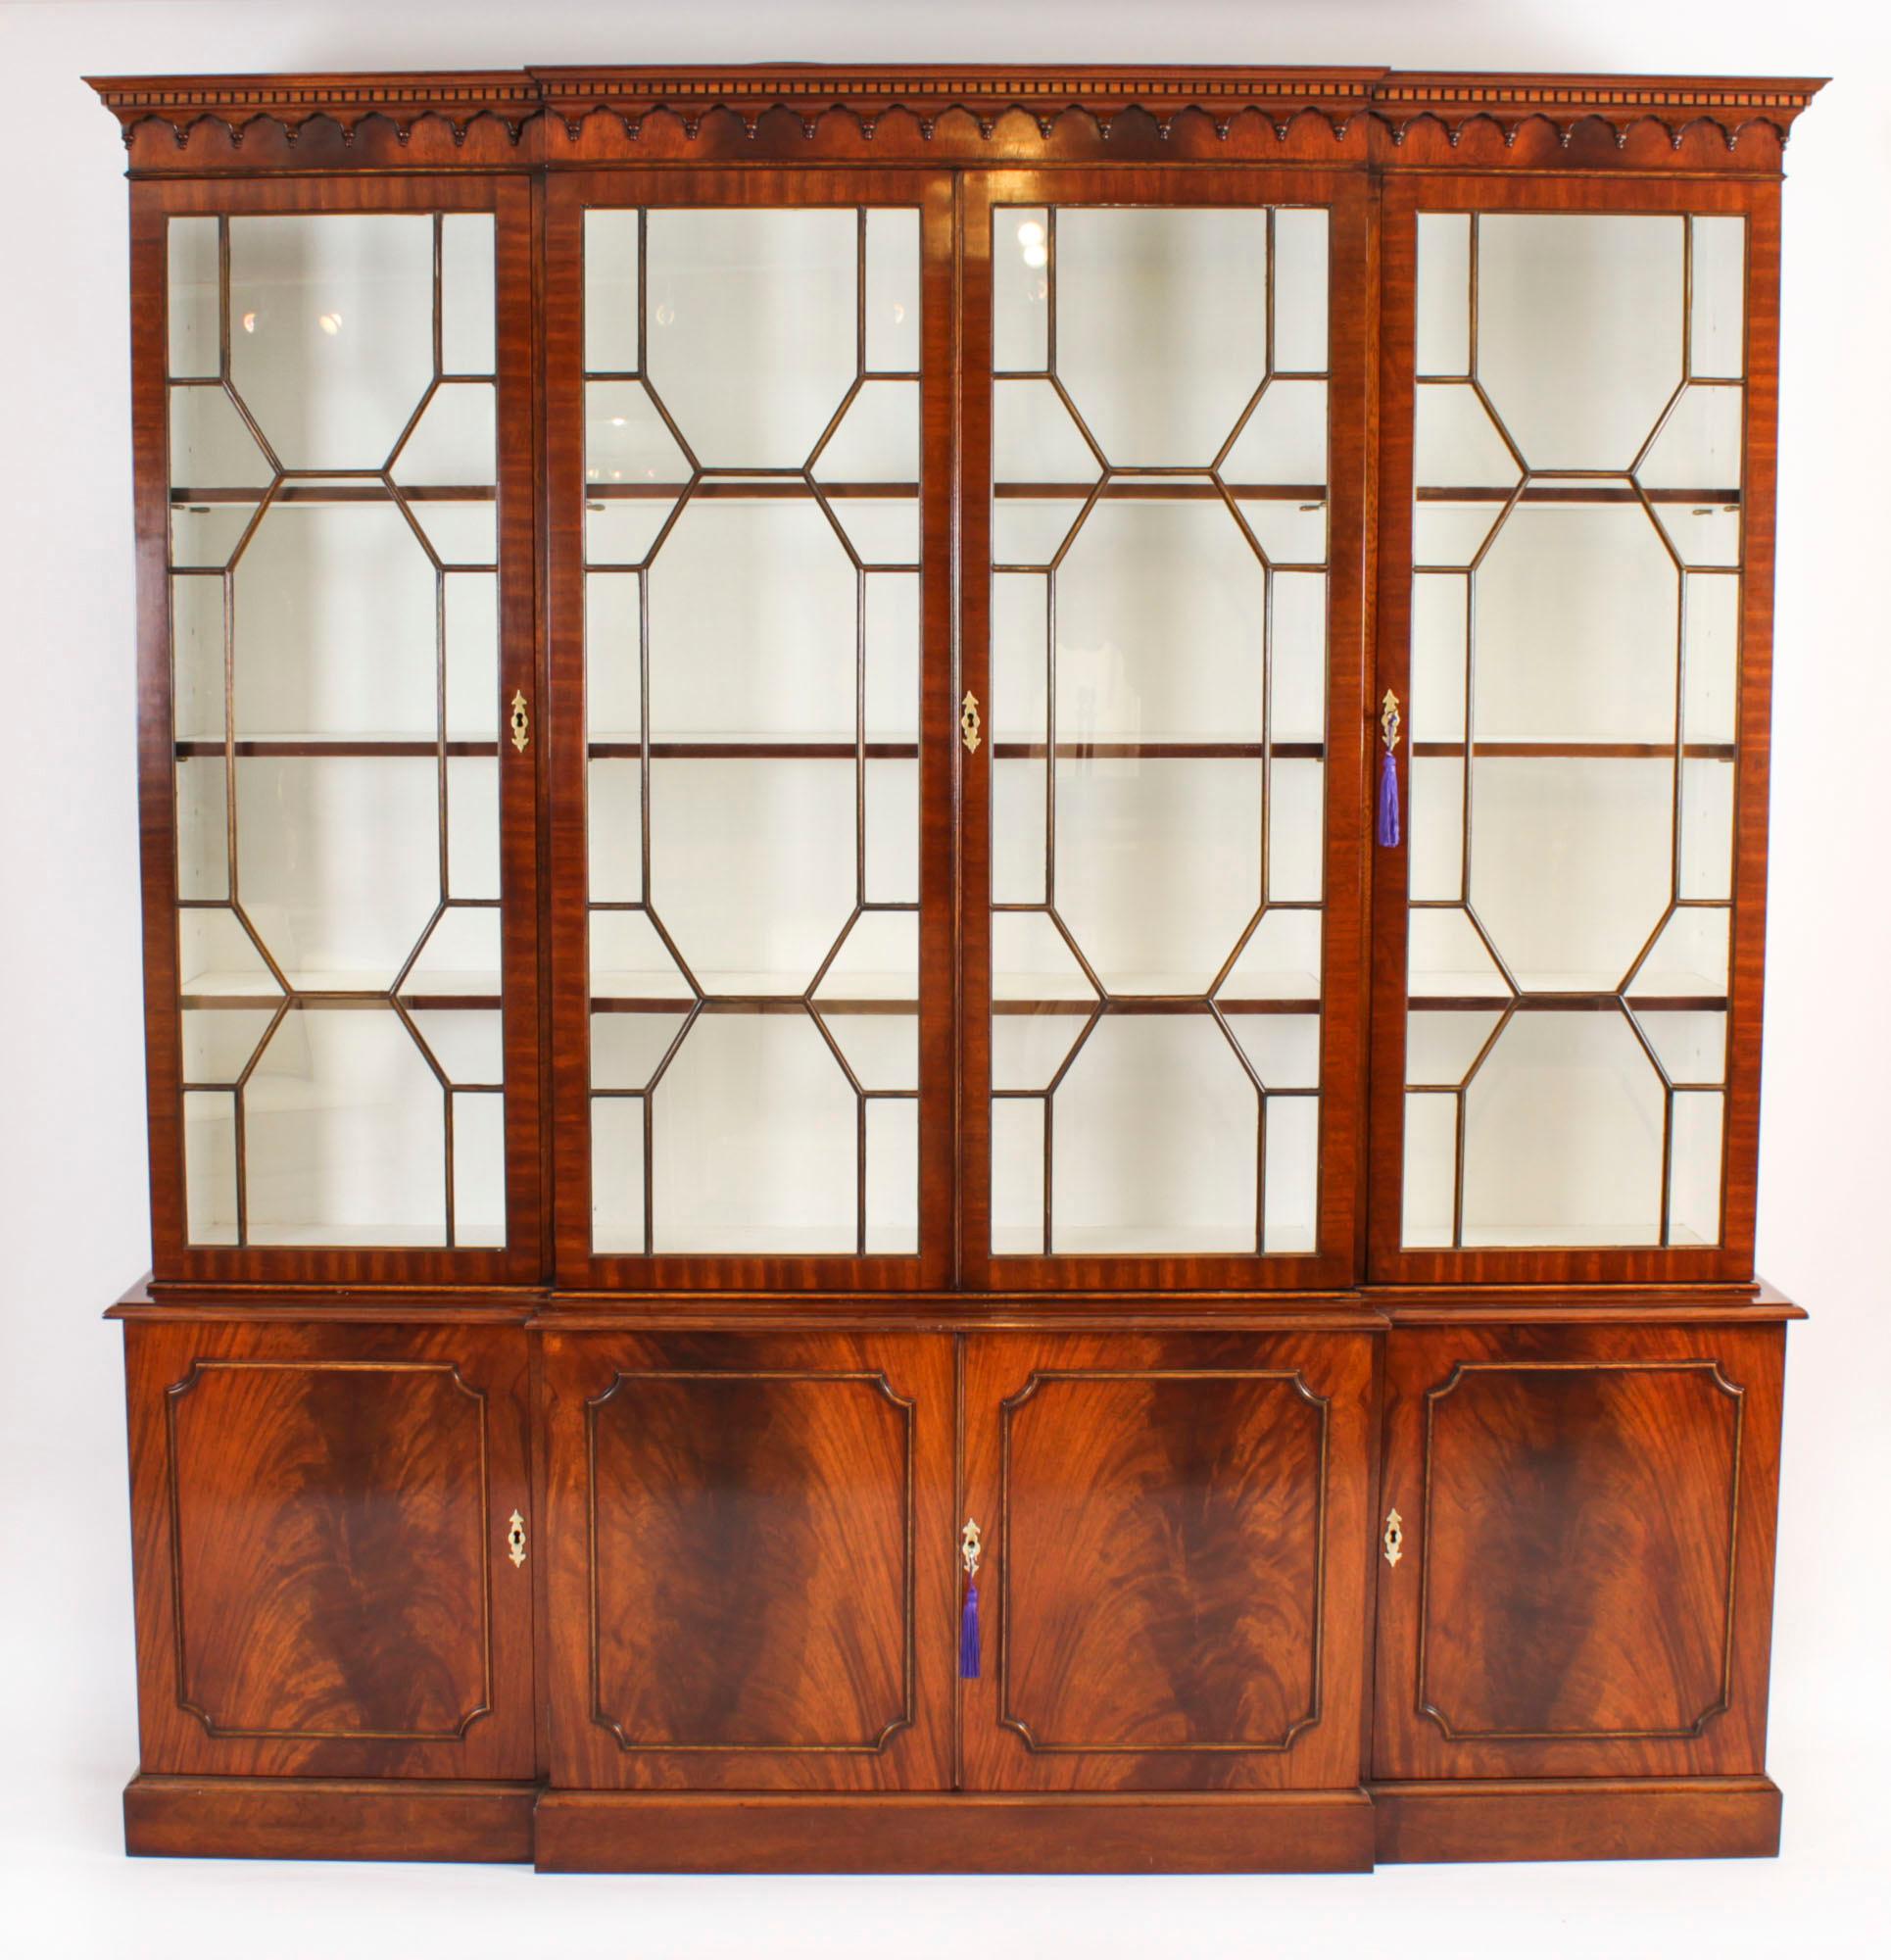 Vintage Georgian Revival Flame Mahogany Breakfront Bookcase 20th Century For Sale 17